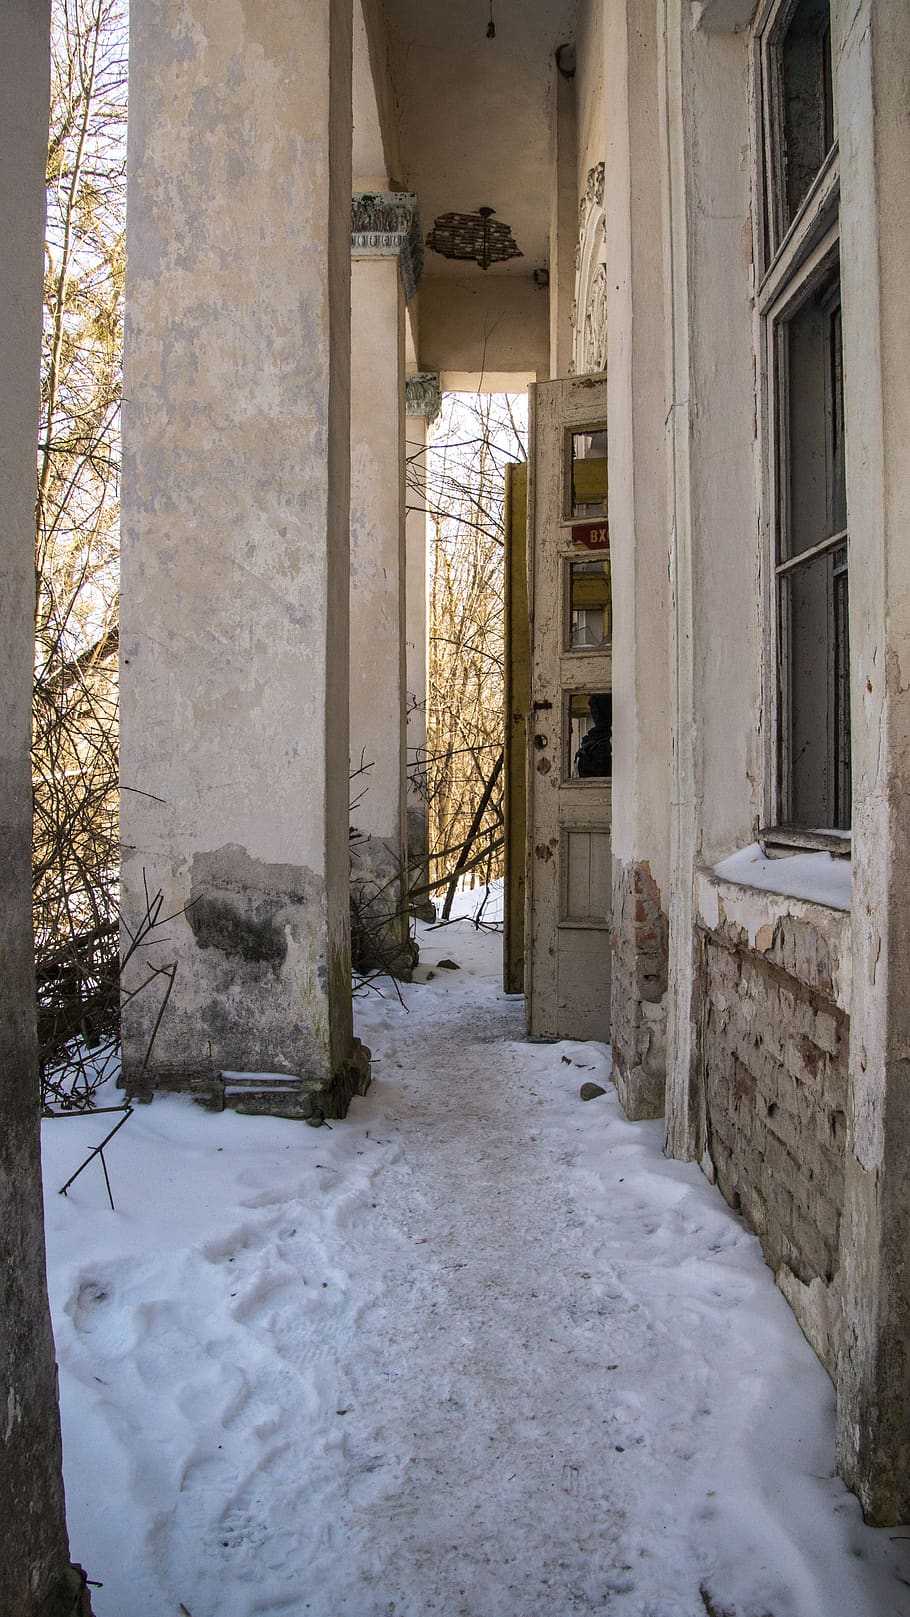 village, snow, culture palace, exclusion zone, winter, white, cold, house, ukraine, radiation